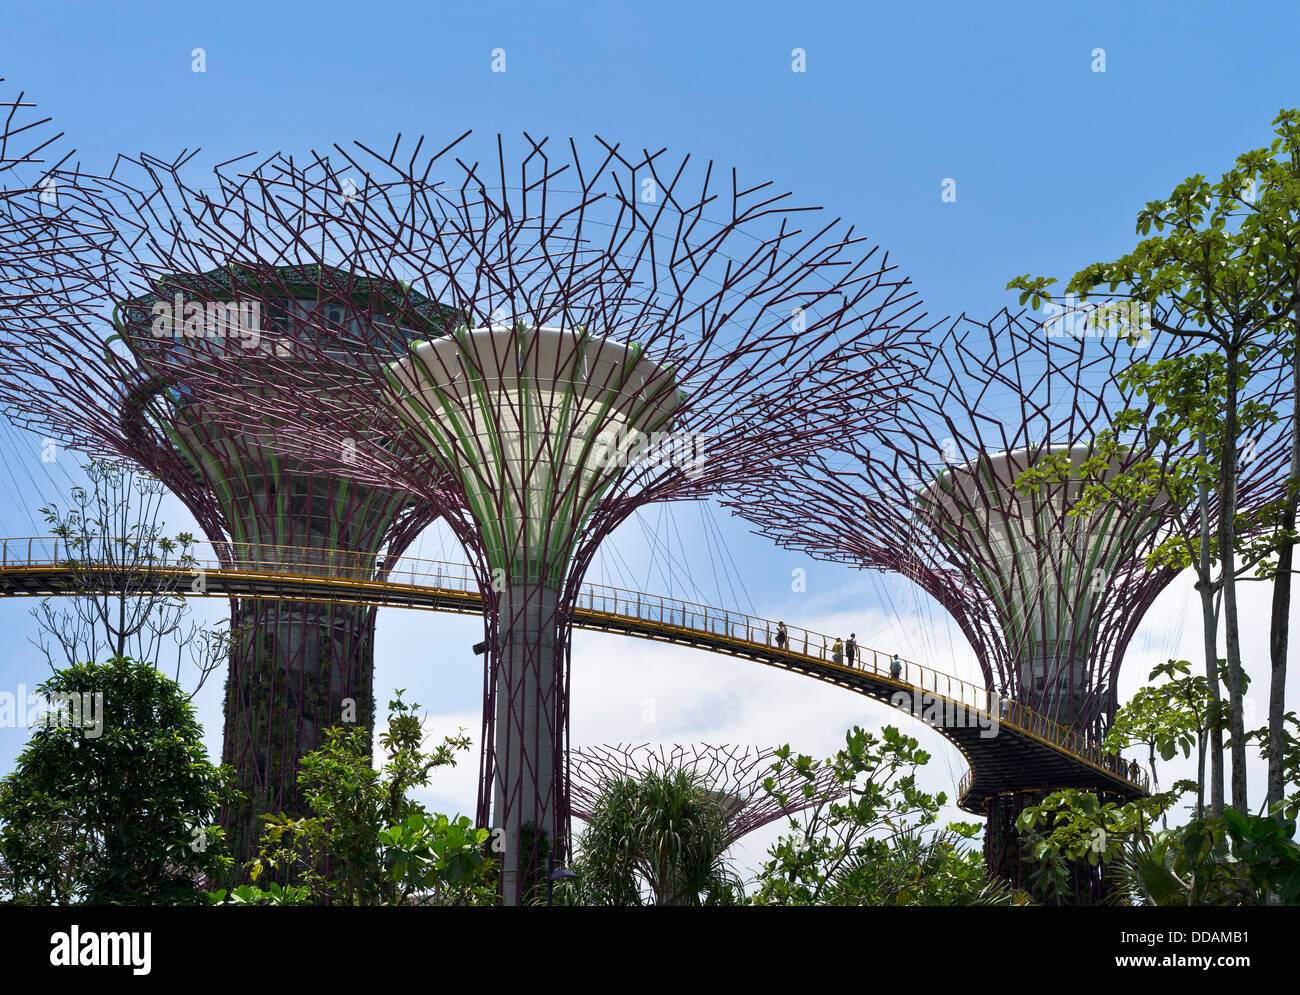 dh Supertree Grove walkway GARDENS BY THE BAY SINGAPORE Supertrees vertical gardens people walking skyway elevated trees garden Stock Photo